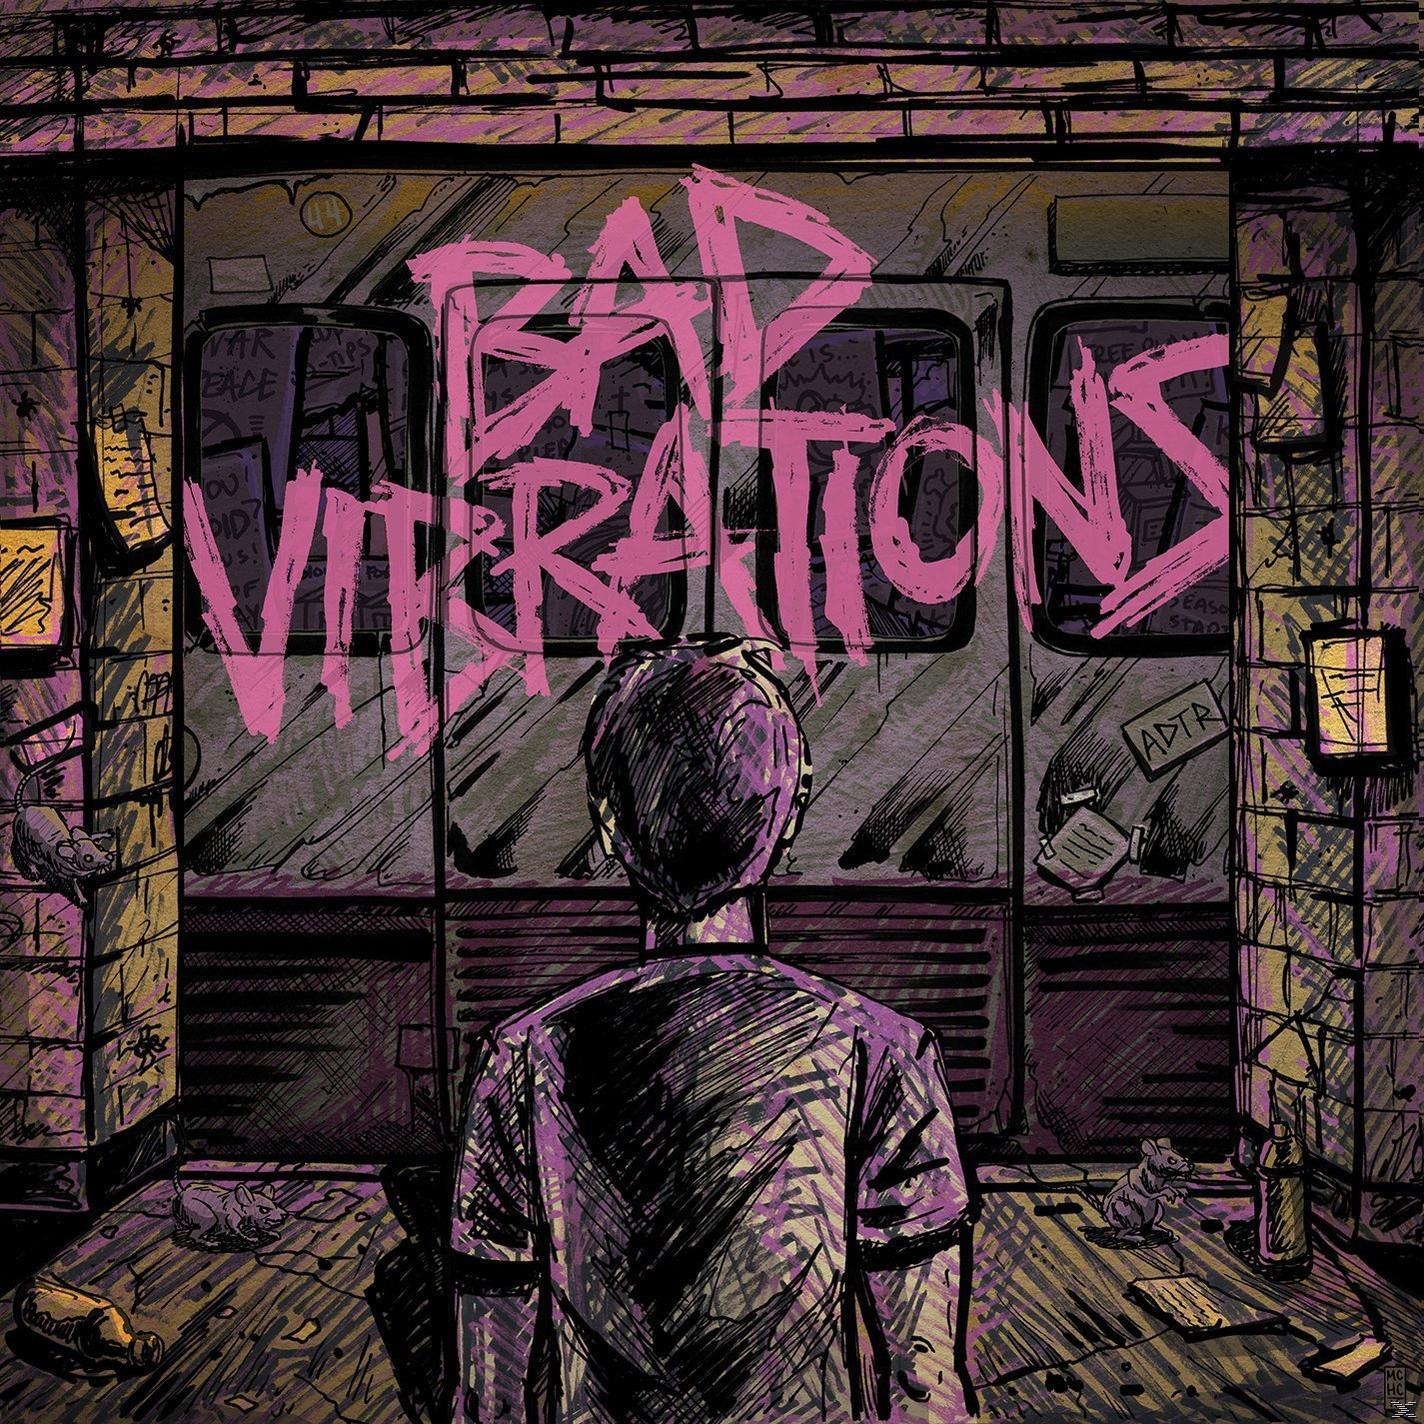 A Day To Vibrations-Deluxe Bad Edition - Remember - (CD)